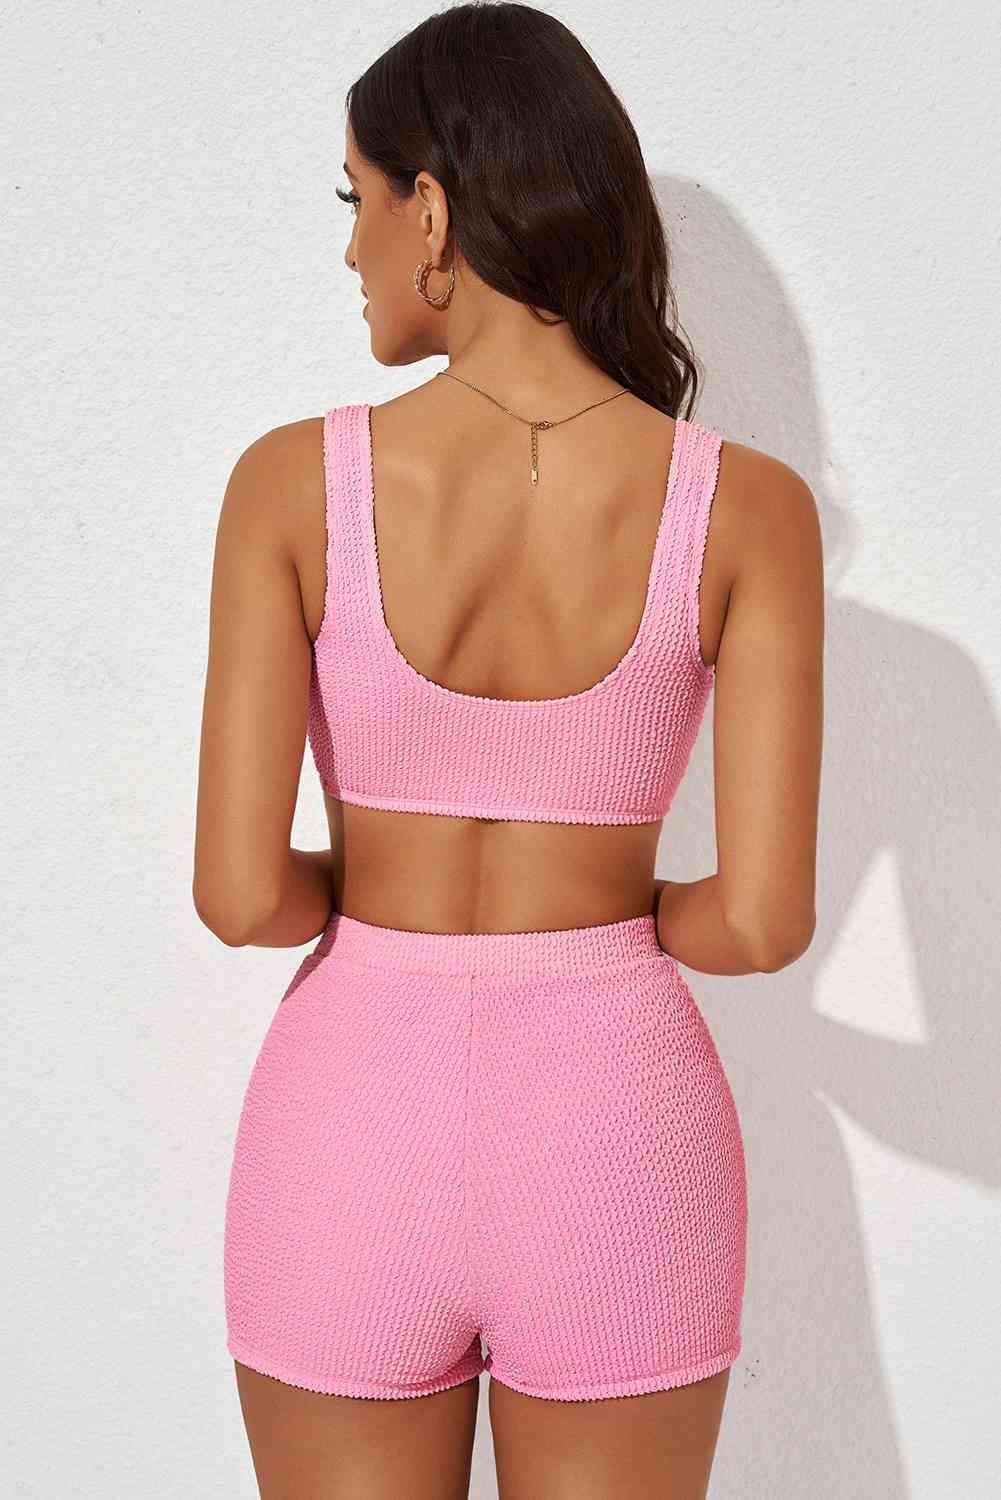 Textured Sports Bra and Shorts Set - ChicaLux